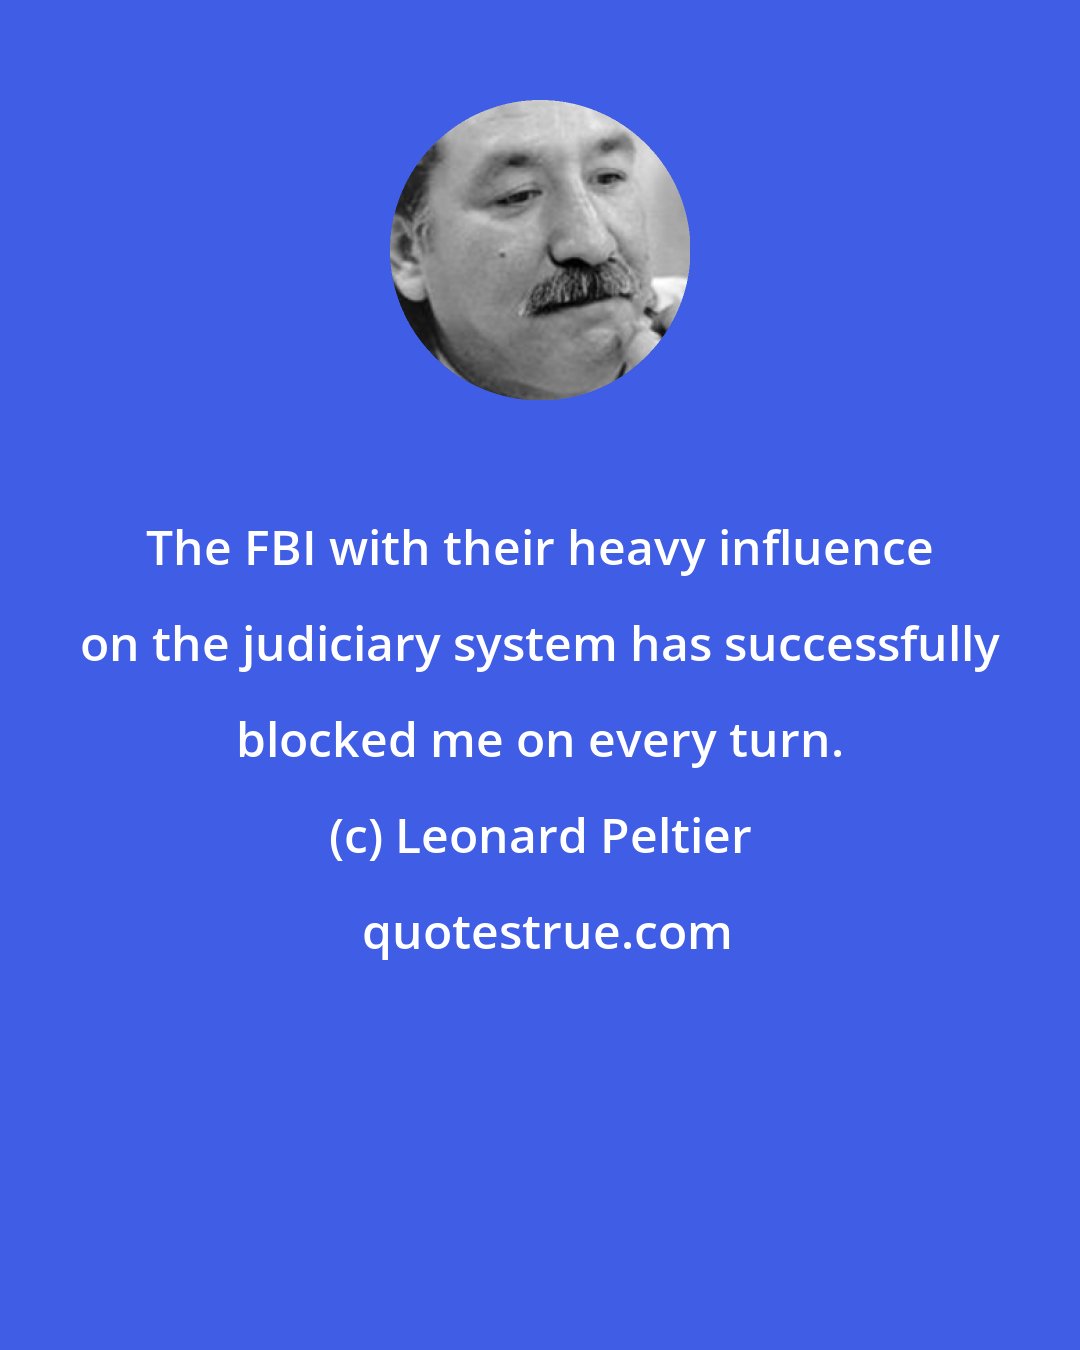 Leonard Peltier: The FBI with their heavy influence on the judiciary system has successfully blocked me on every turn.